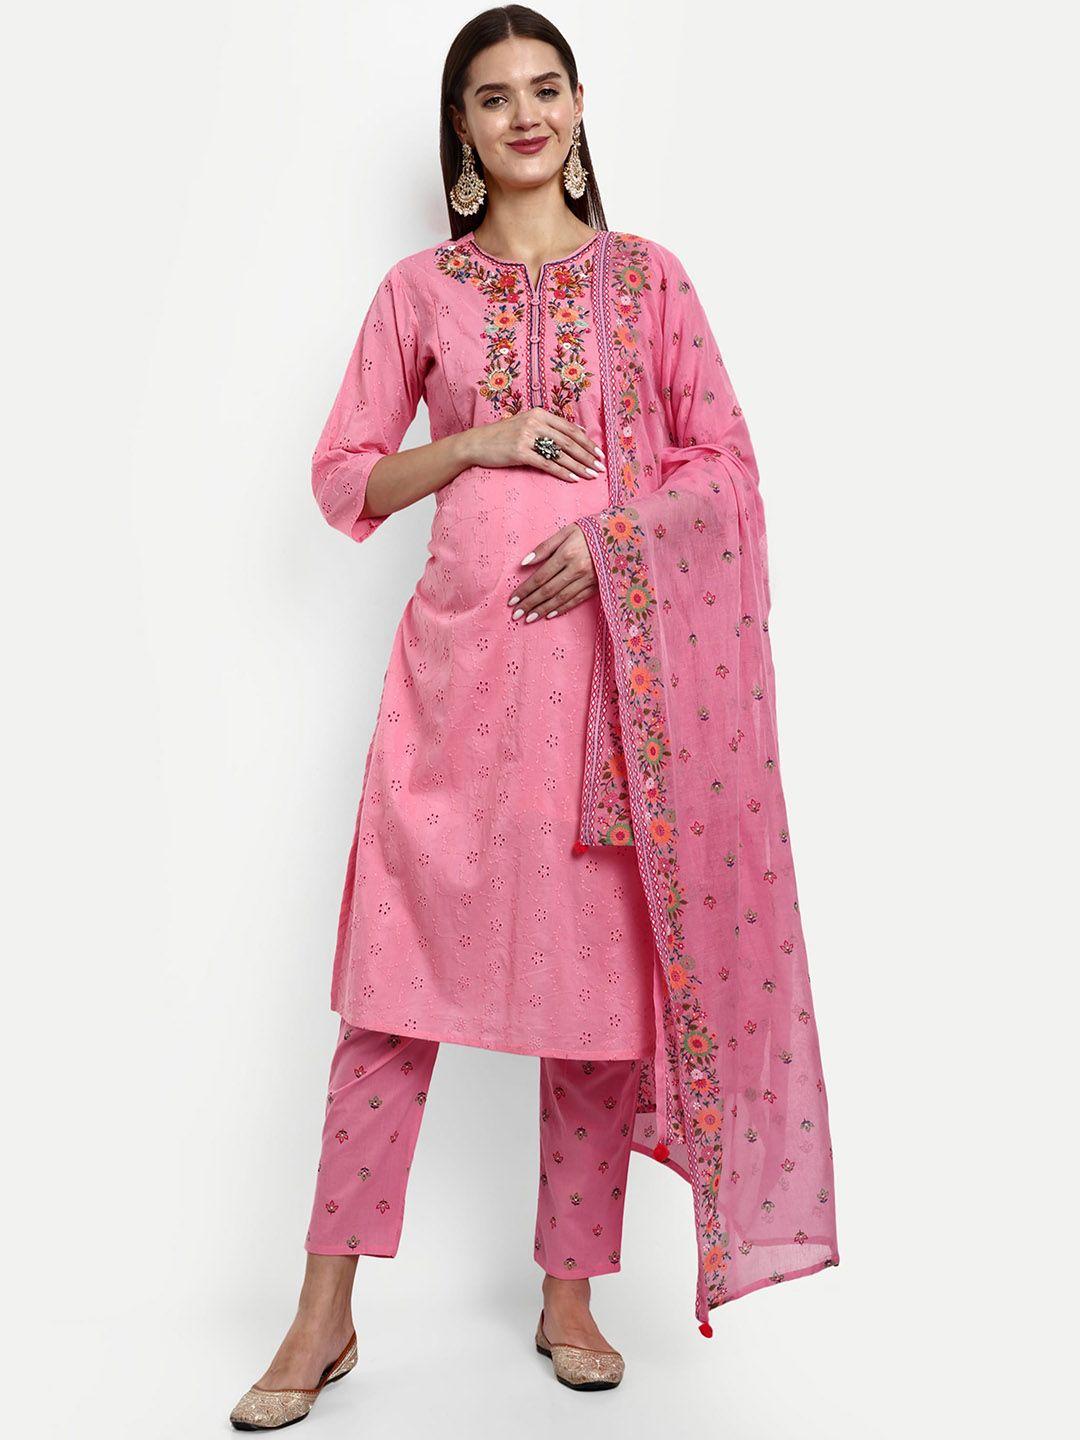 mumzhug floral embroidered thread work pure cotton maternity kurta with trousers & dupatta